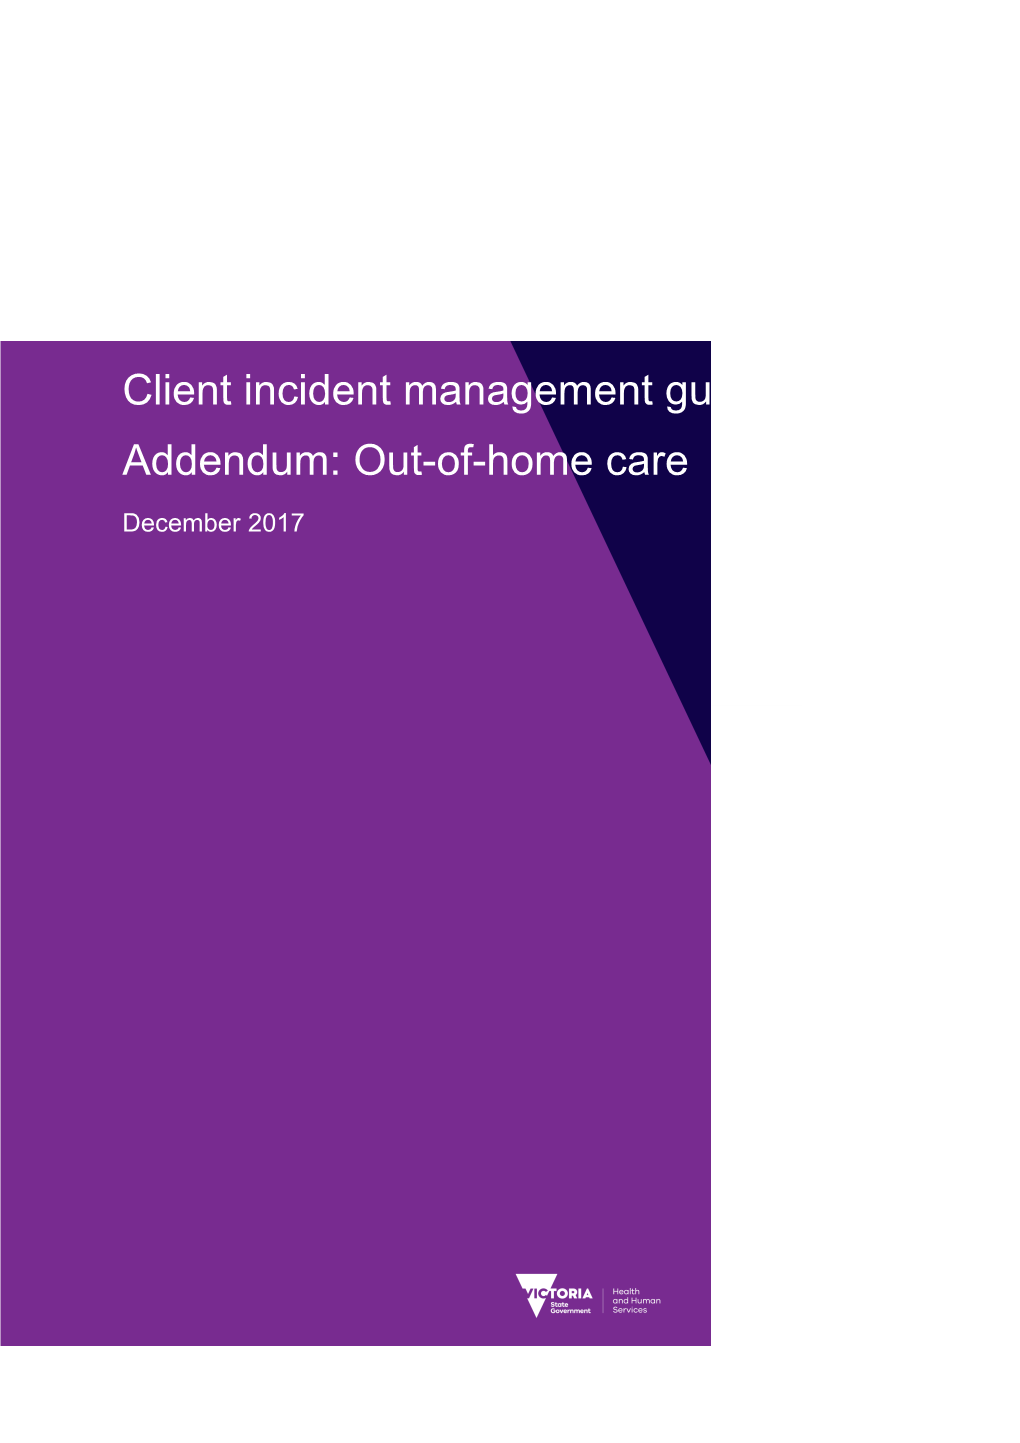 Client Incident Management Guide Addendum Out-Of-Home Care